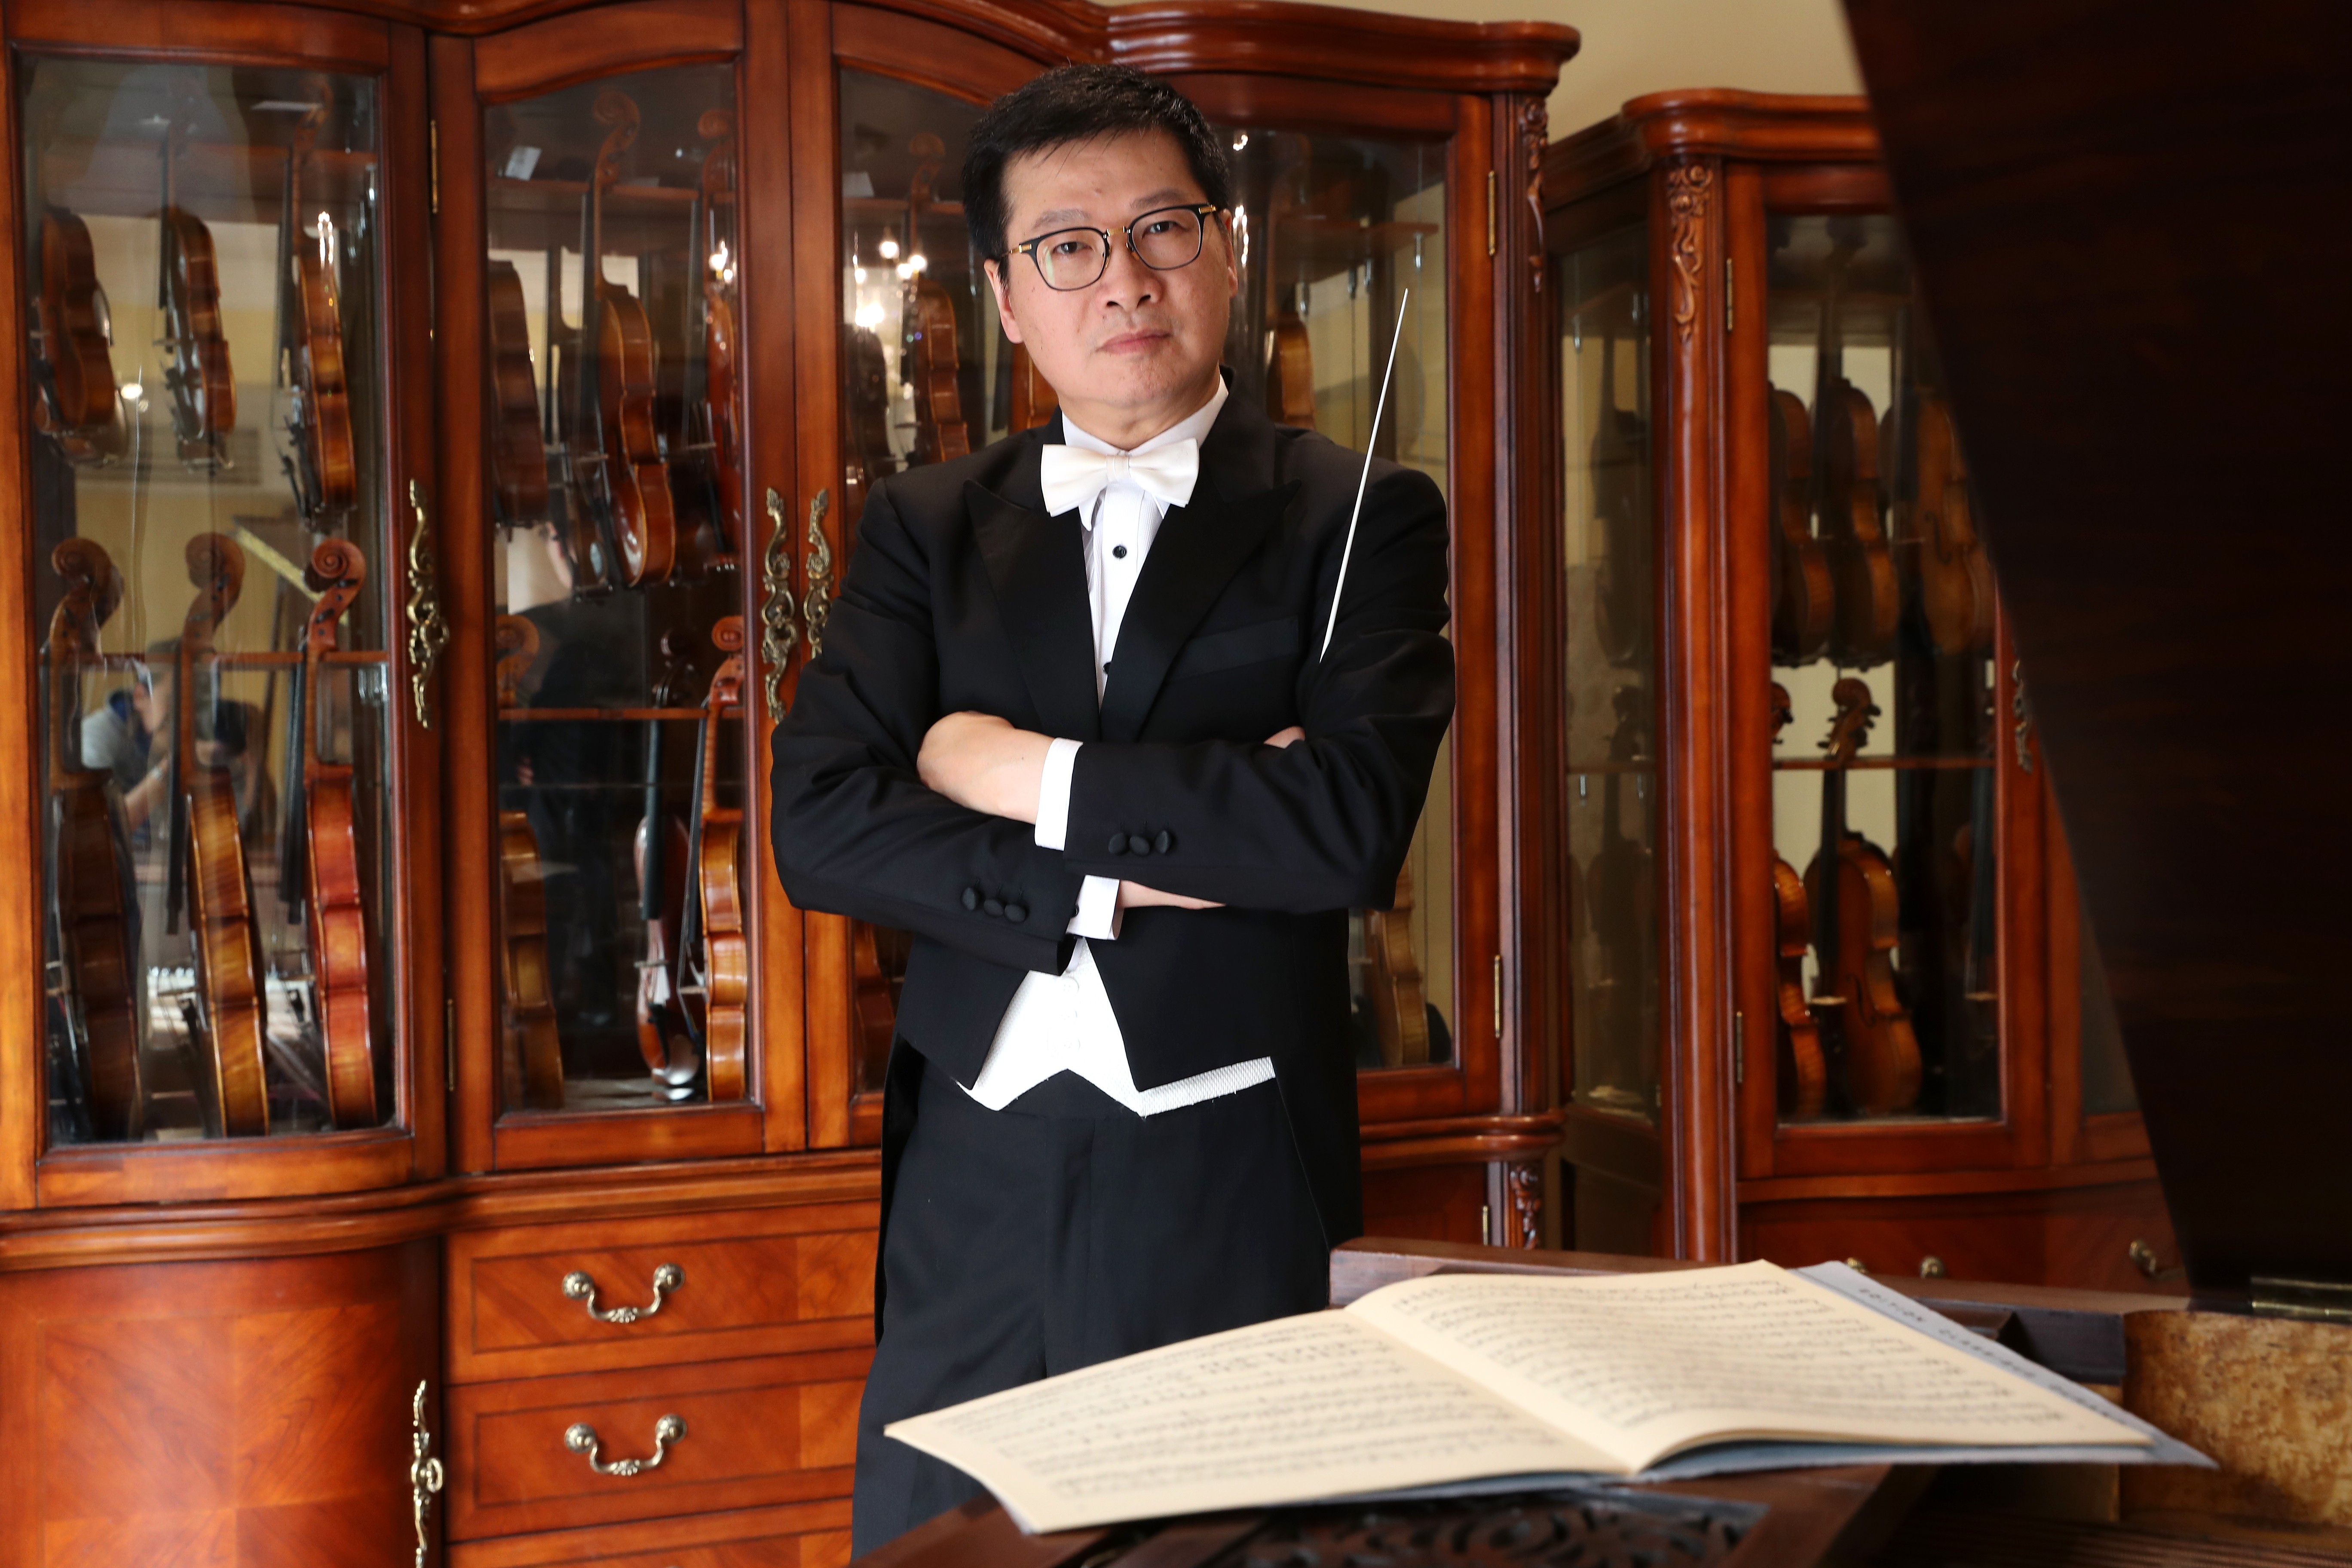 Fan Ting will conduct the Saigon Philharmonic Orchestra. Photo: K.Y. Cheng